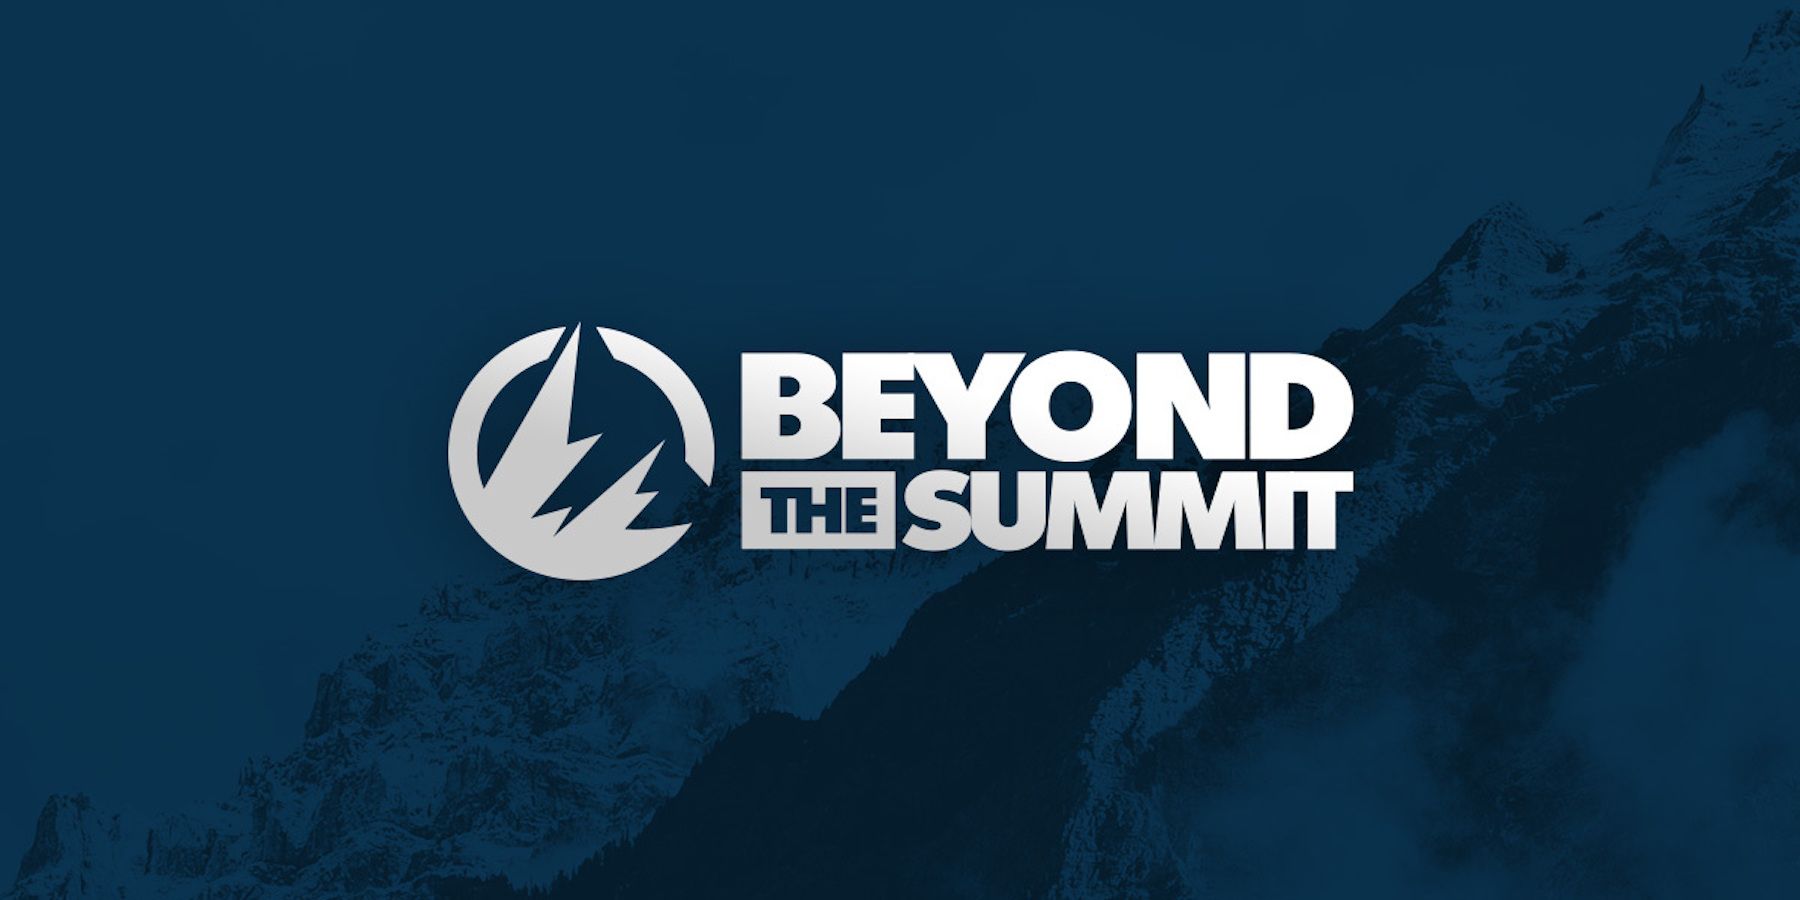 Beyond the Summit is Shutting Down After 11 Years